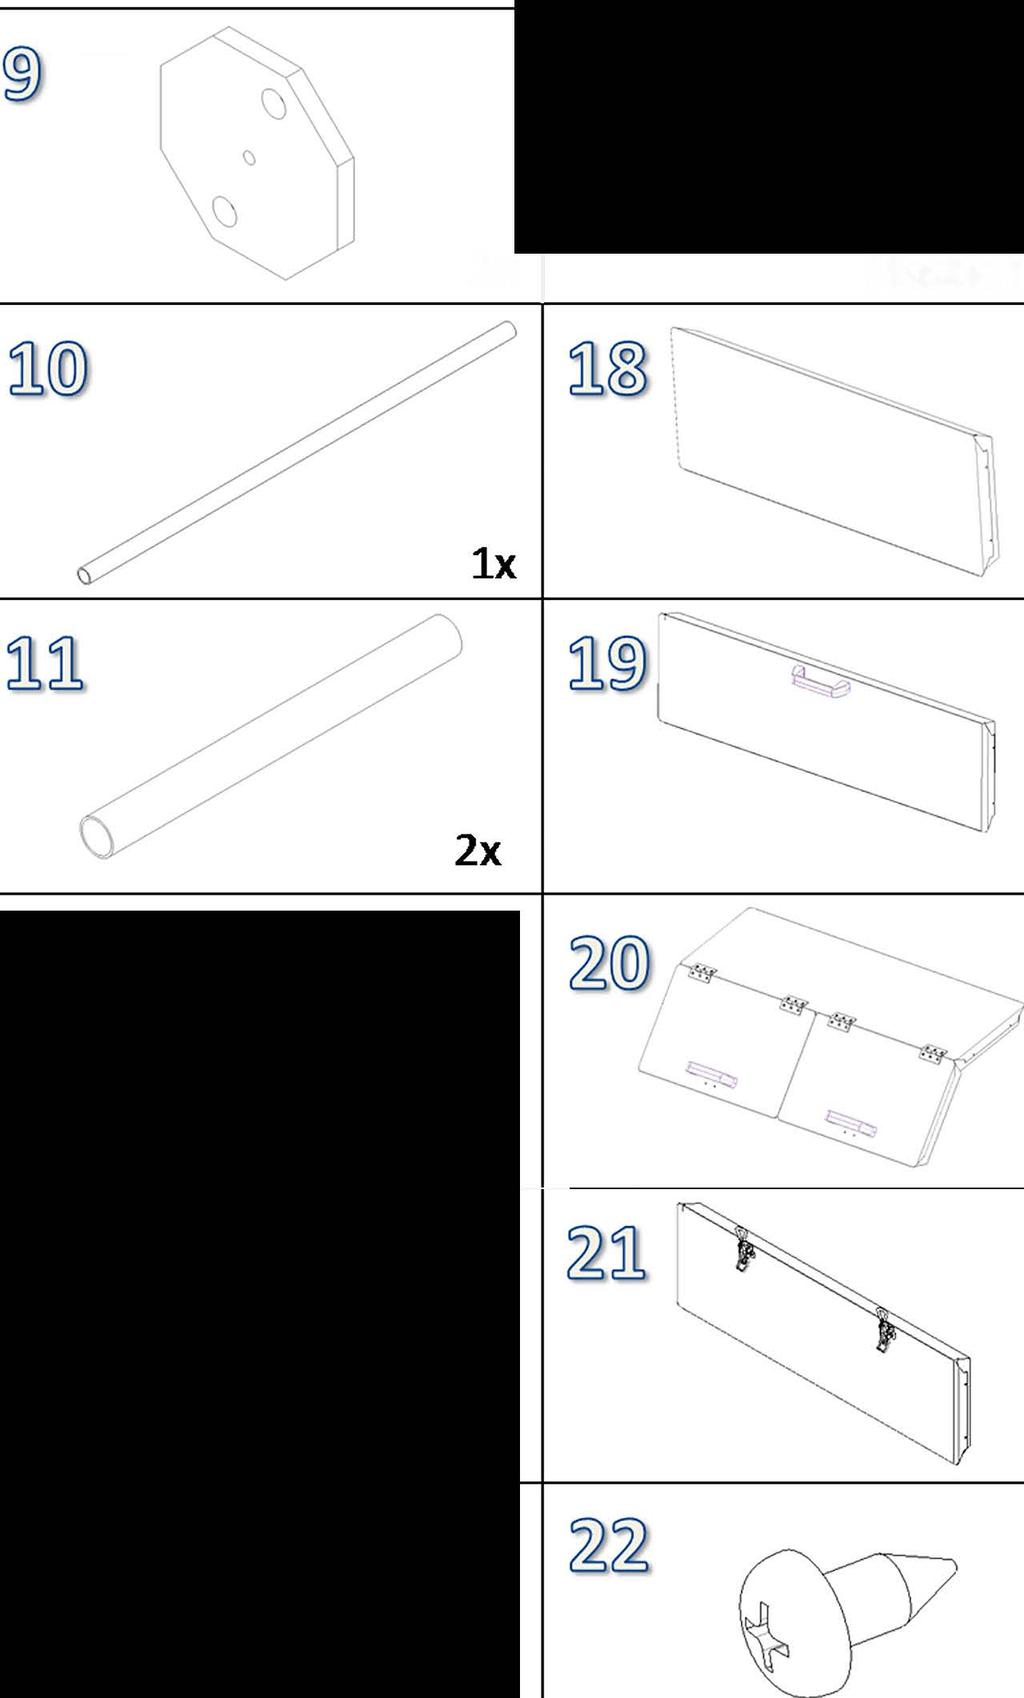 TOOLS REQUIRED: One knife to open packaging Two ½ wrench or socket (metric 13) One 9/16 wrench or socket (metric 14) One #2 Philips (+) screwdriver NOTE: All bolts are 9/16 (metric